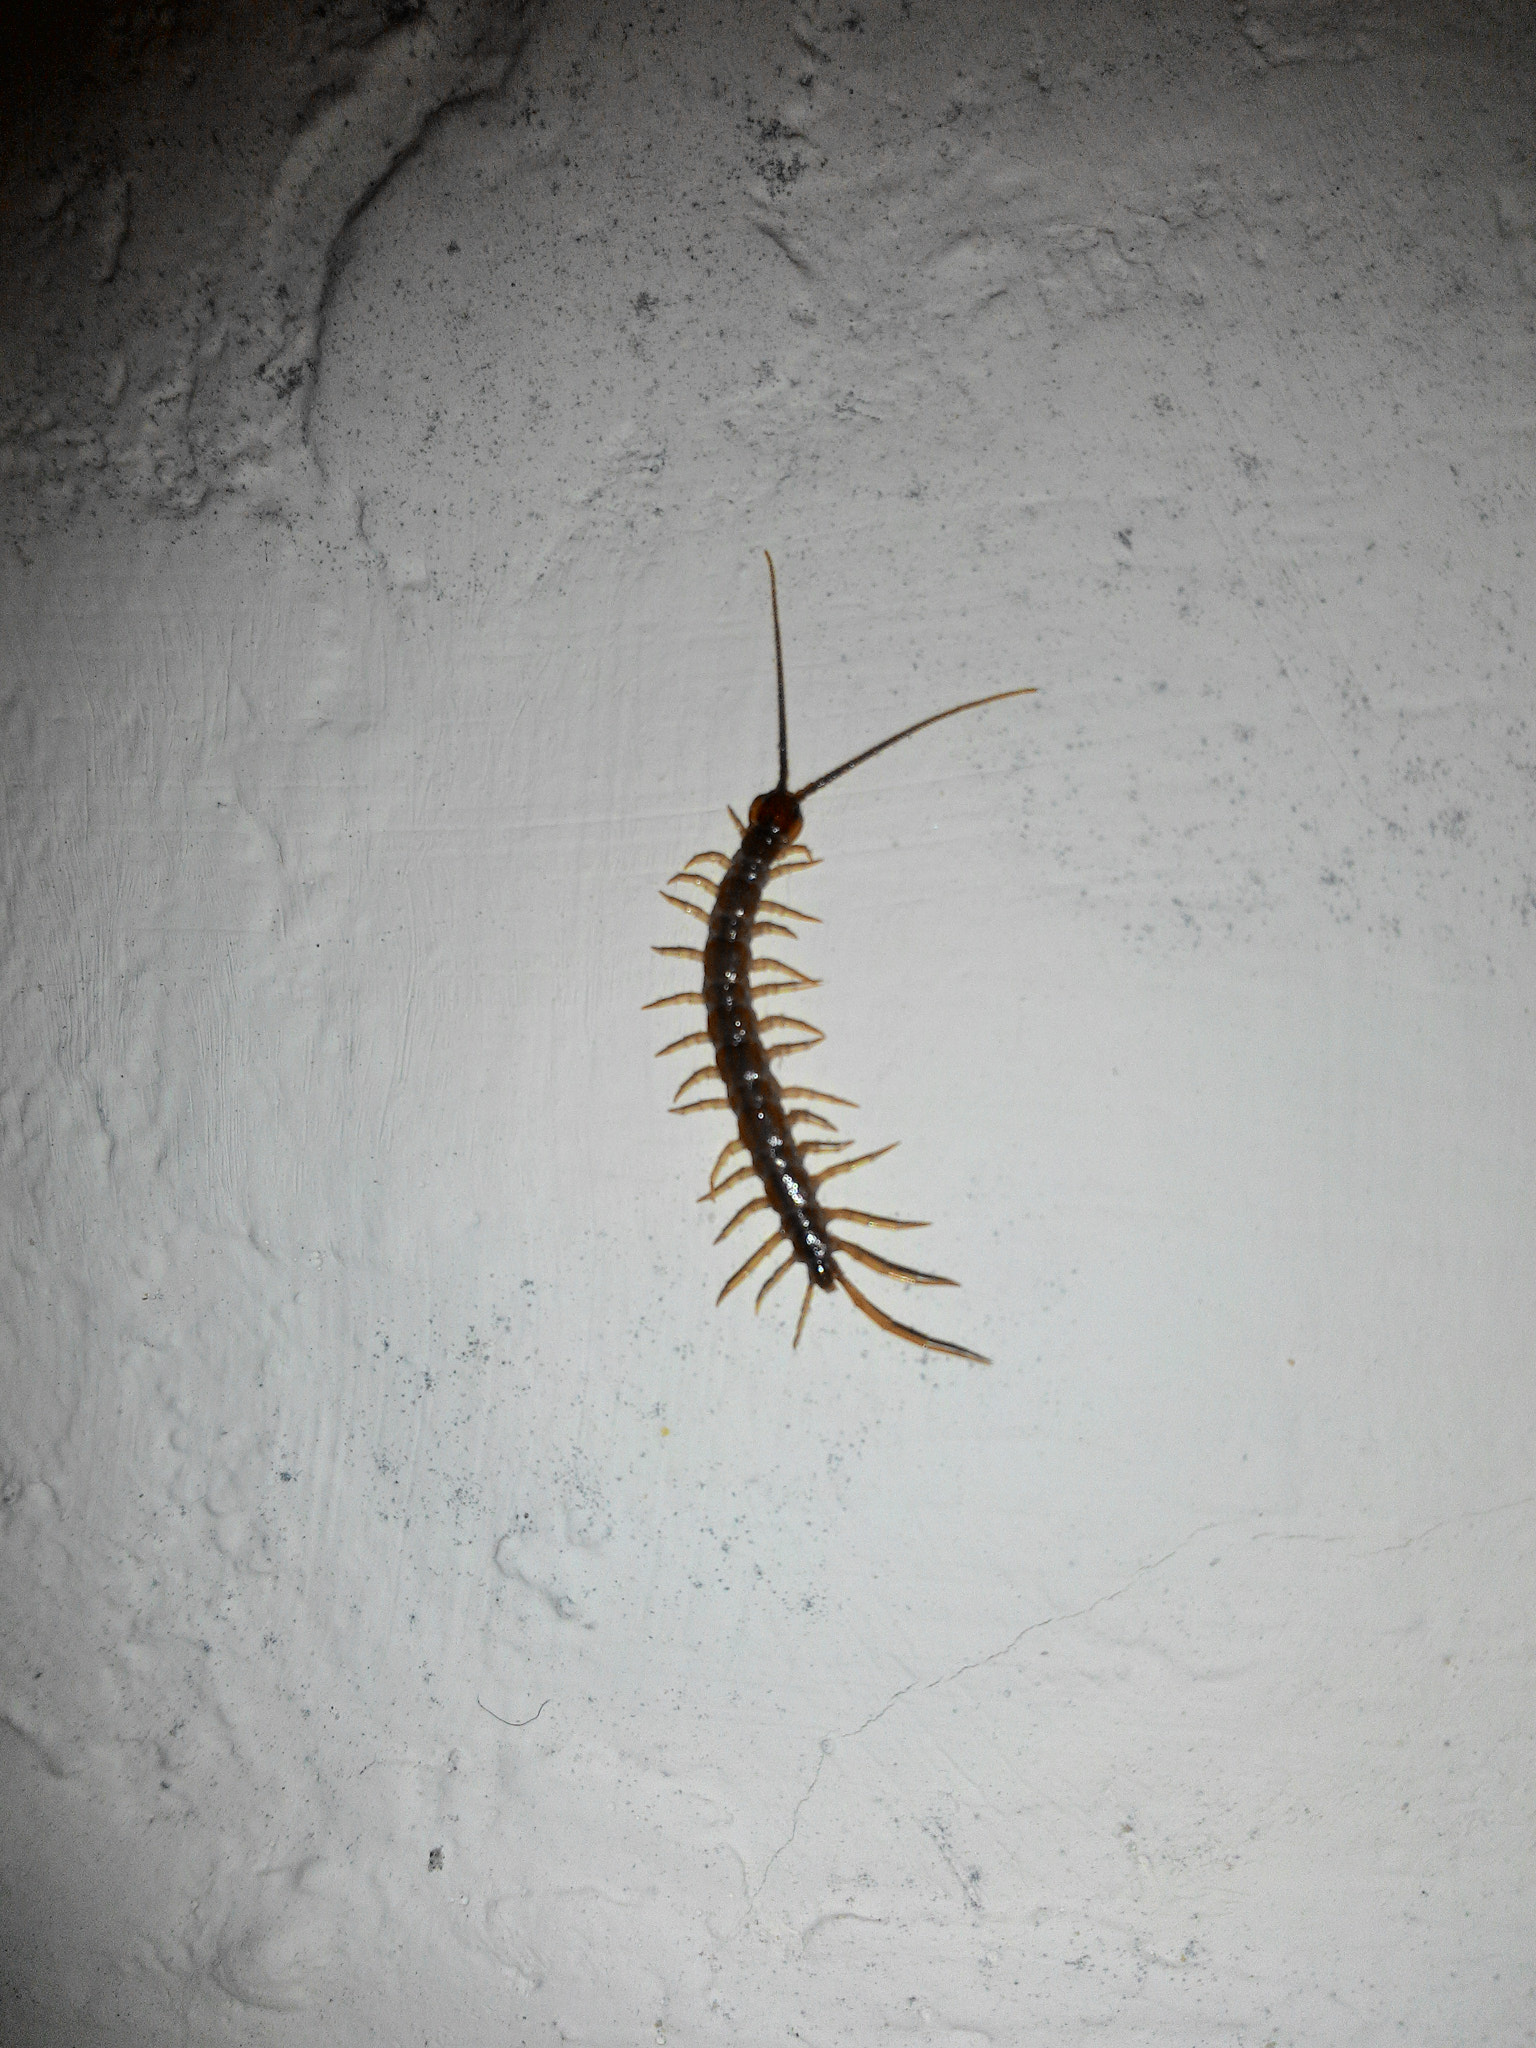 ASUS Z002 sample photo. A house centipede photography